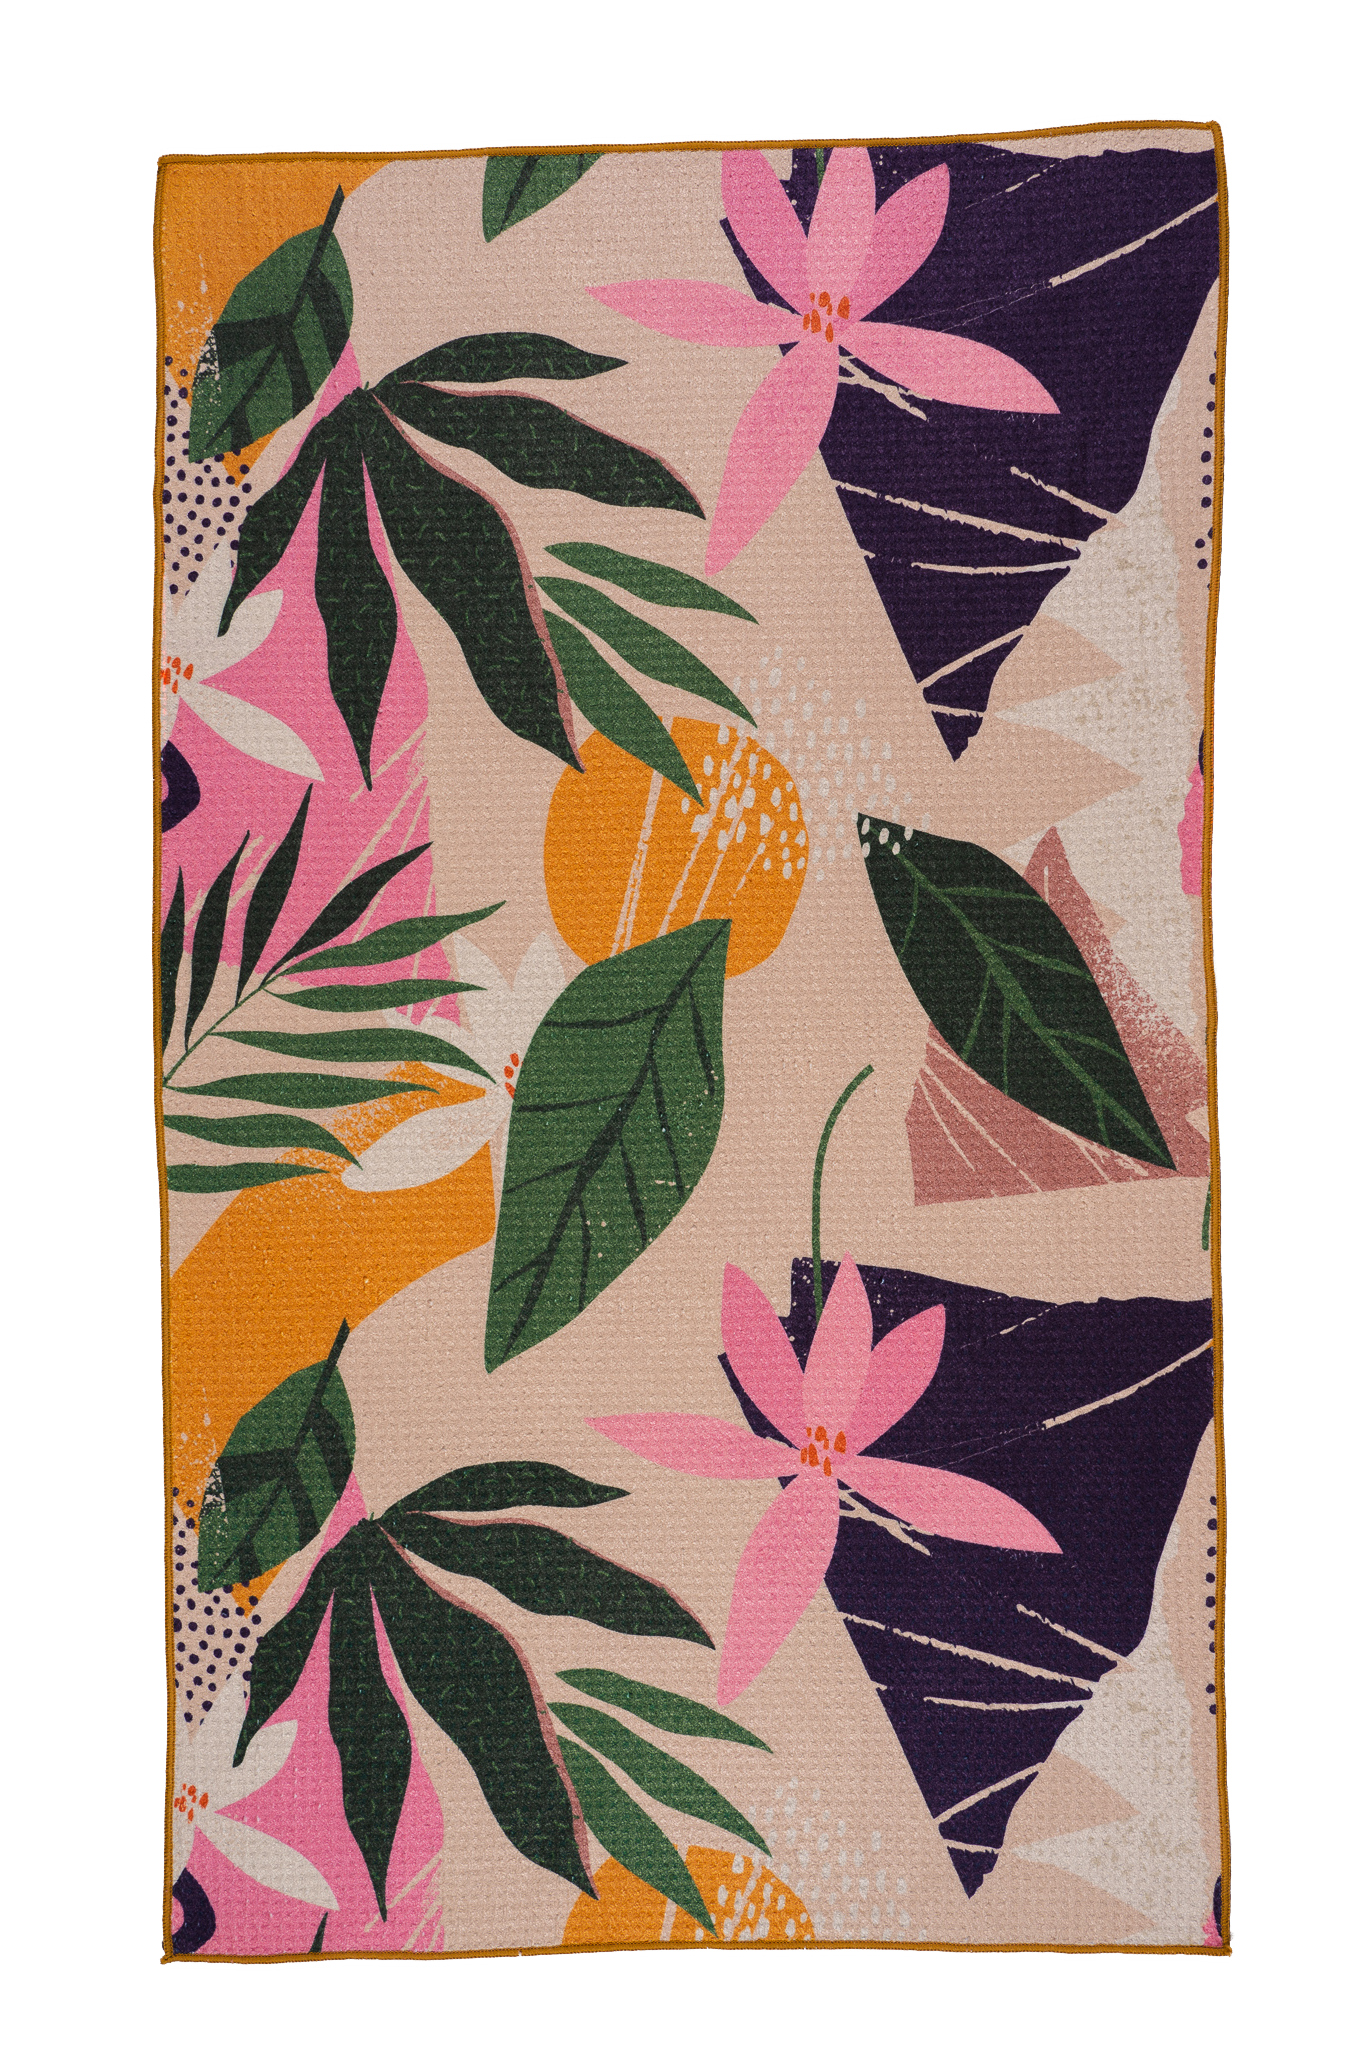 This is the tropical design with pink tropical flowers, green bamboo leaves, and yellow and purple shapes.